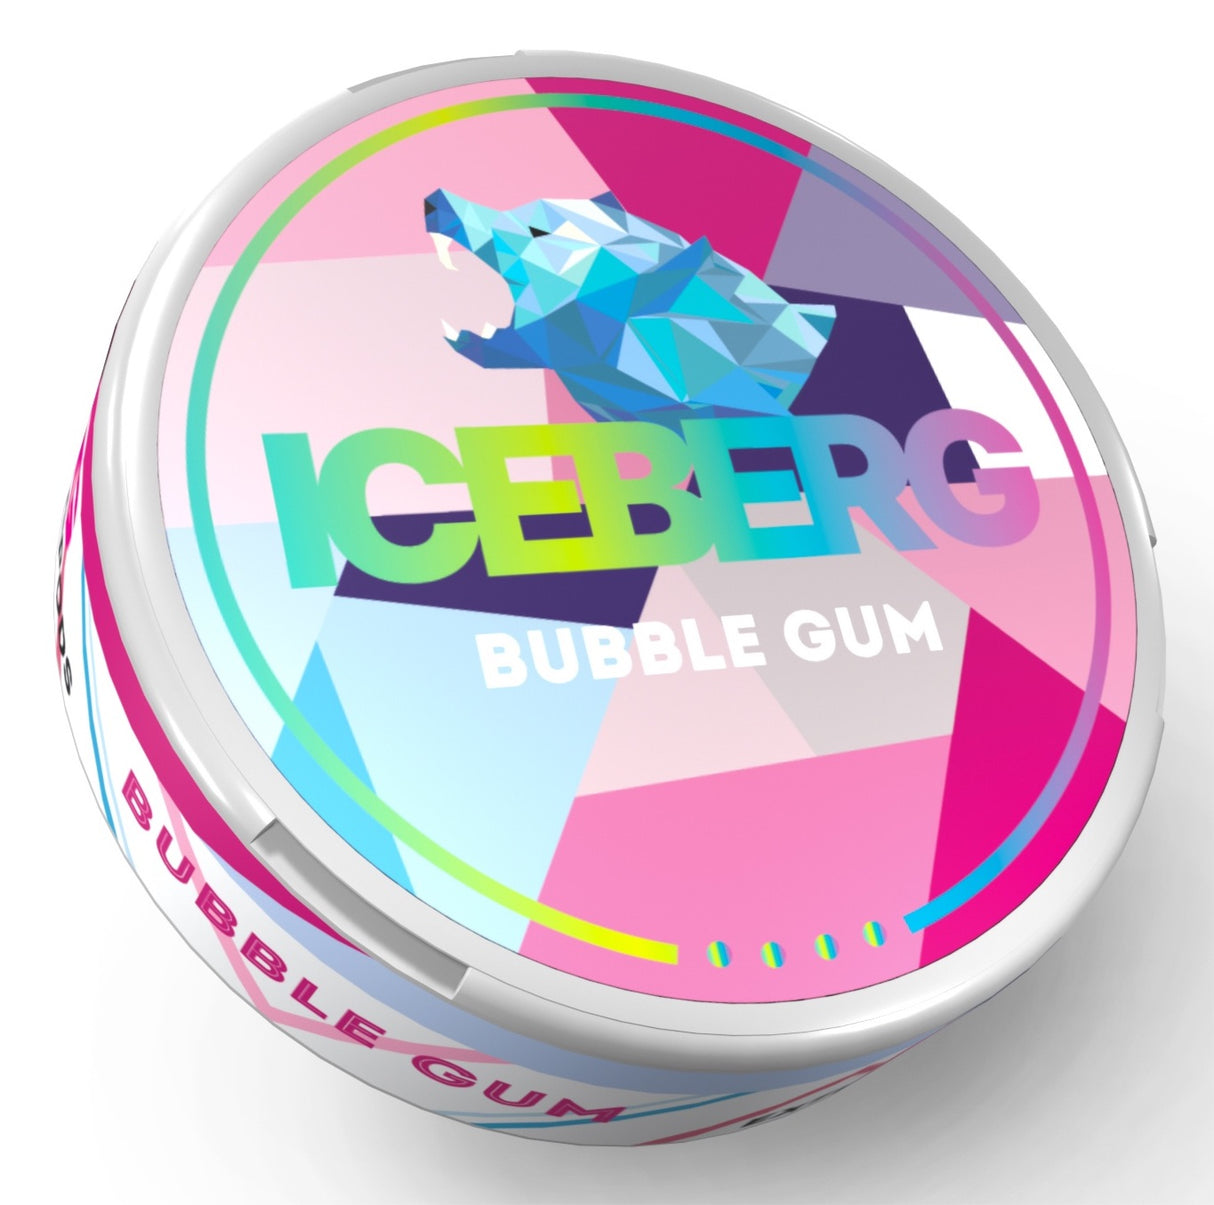 Bubble Gum Nicotine Pouches By Iceberg